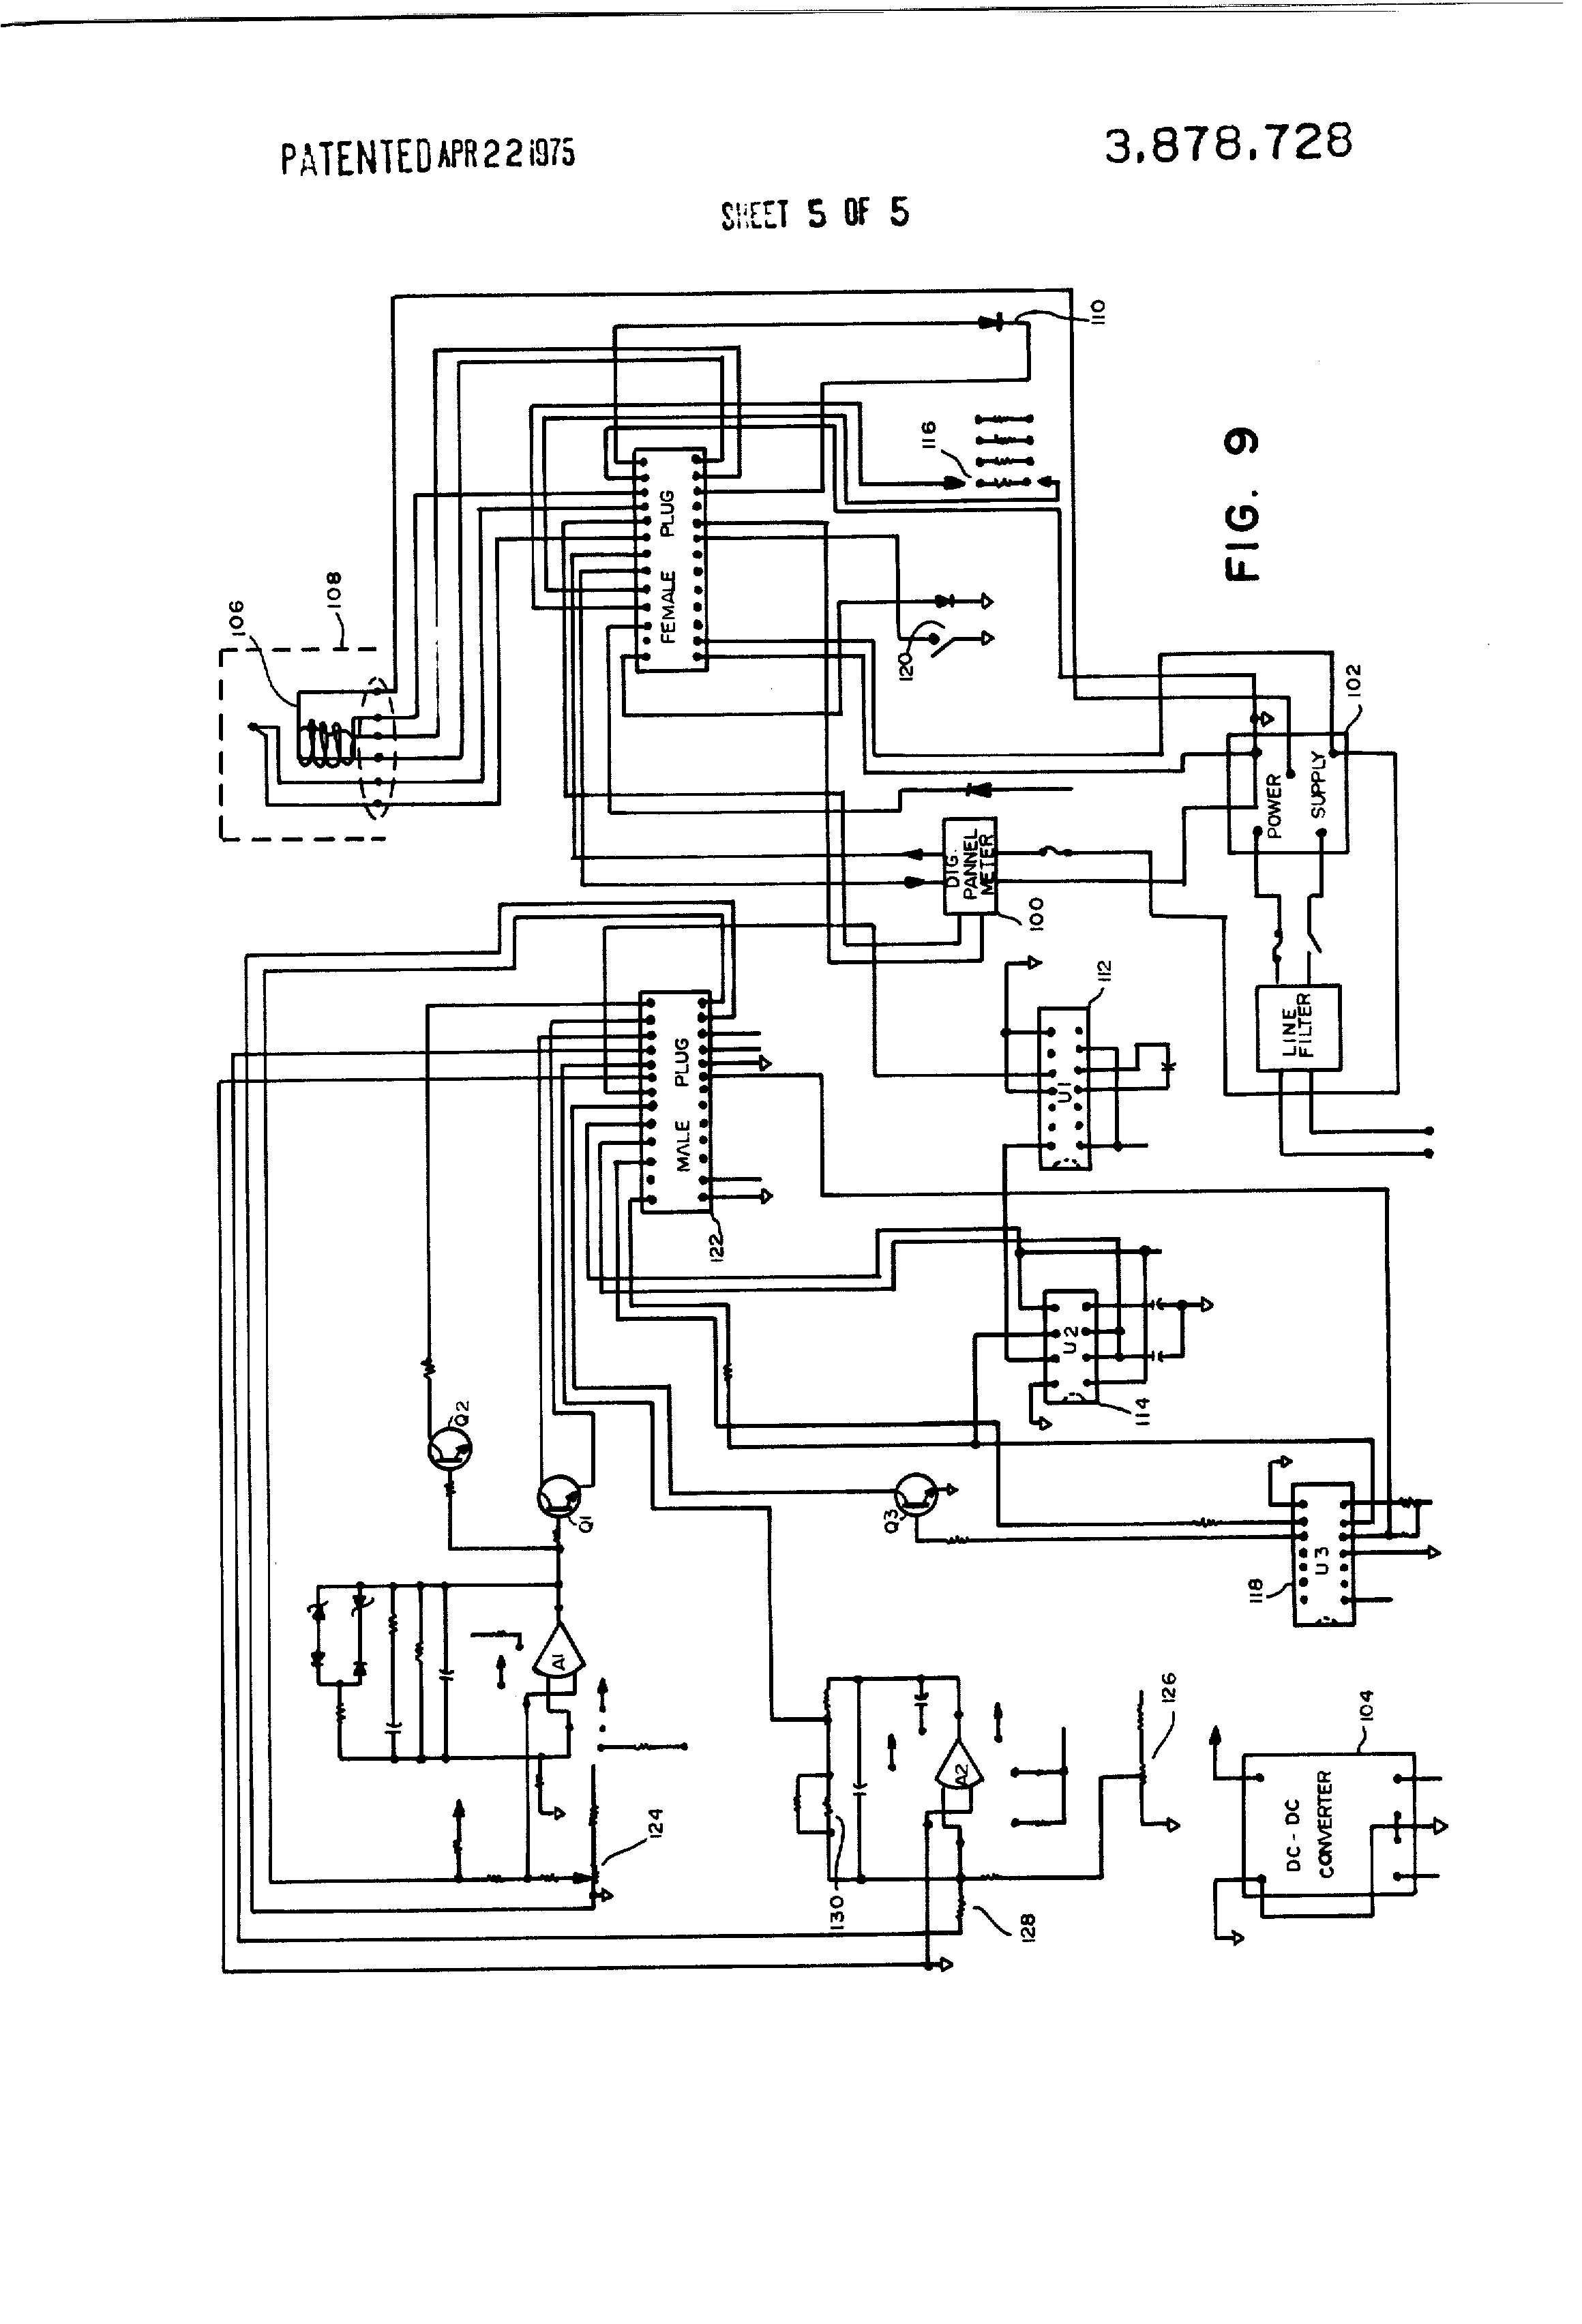 Grove Manlift Wiring Diagram from schematron.org